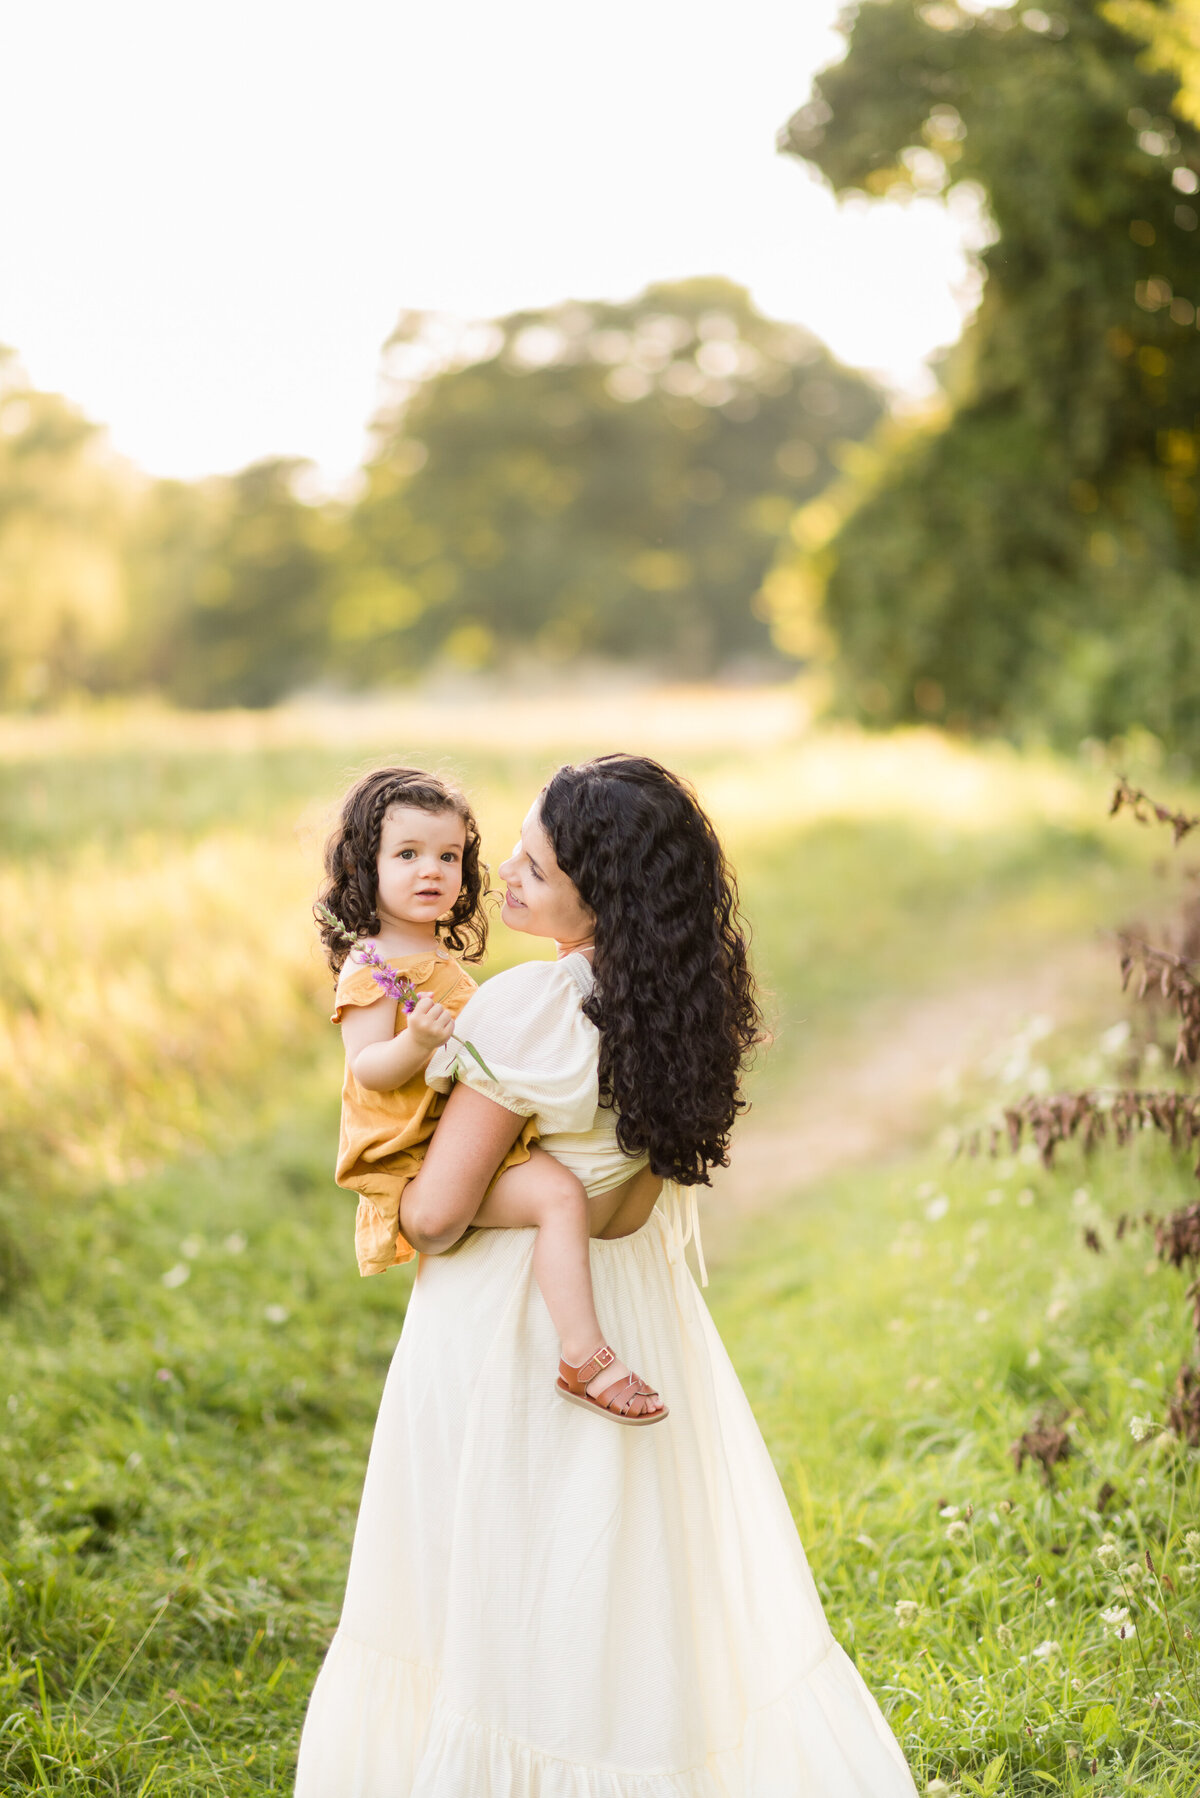 Boston-family-photographer-bella-wang-photography-Lifestyle-session-outdoor-wildflower-17